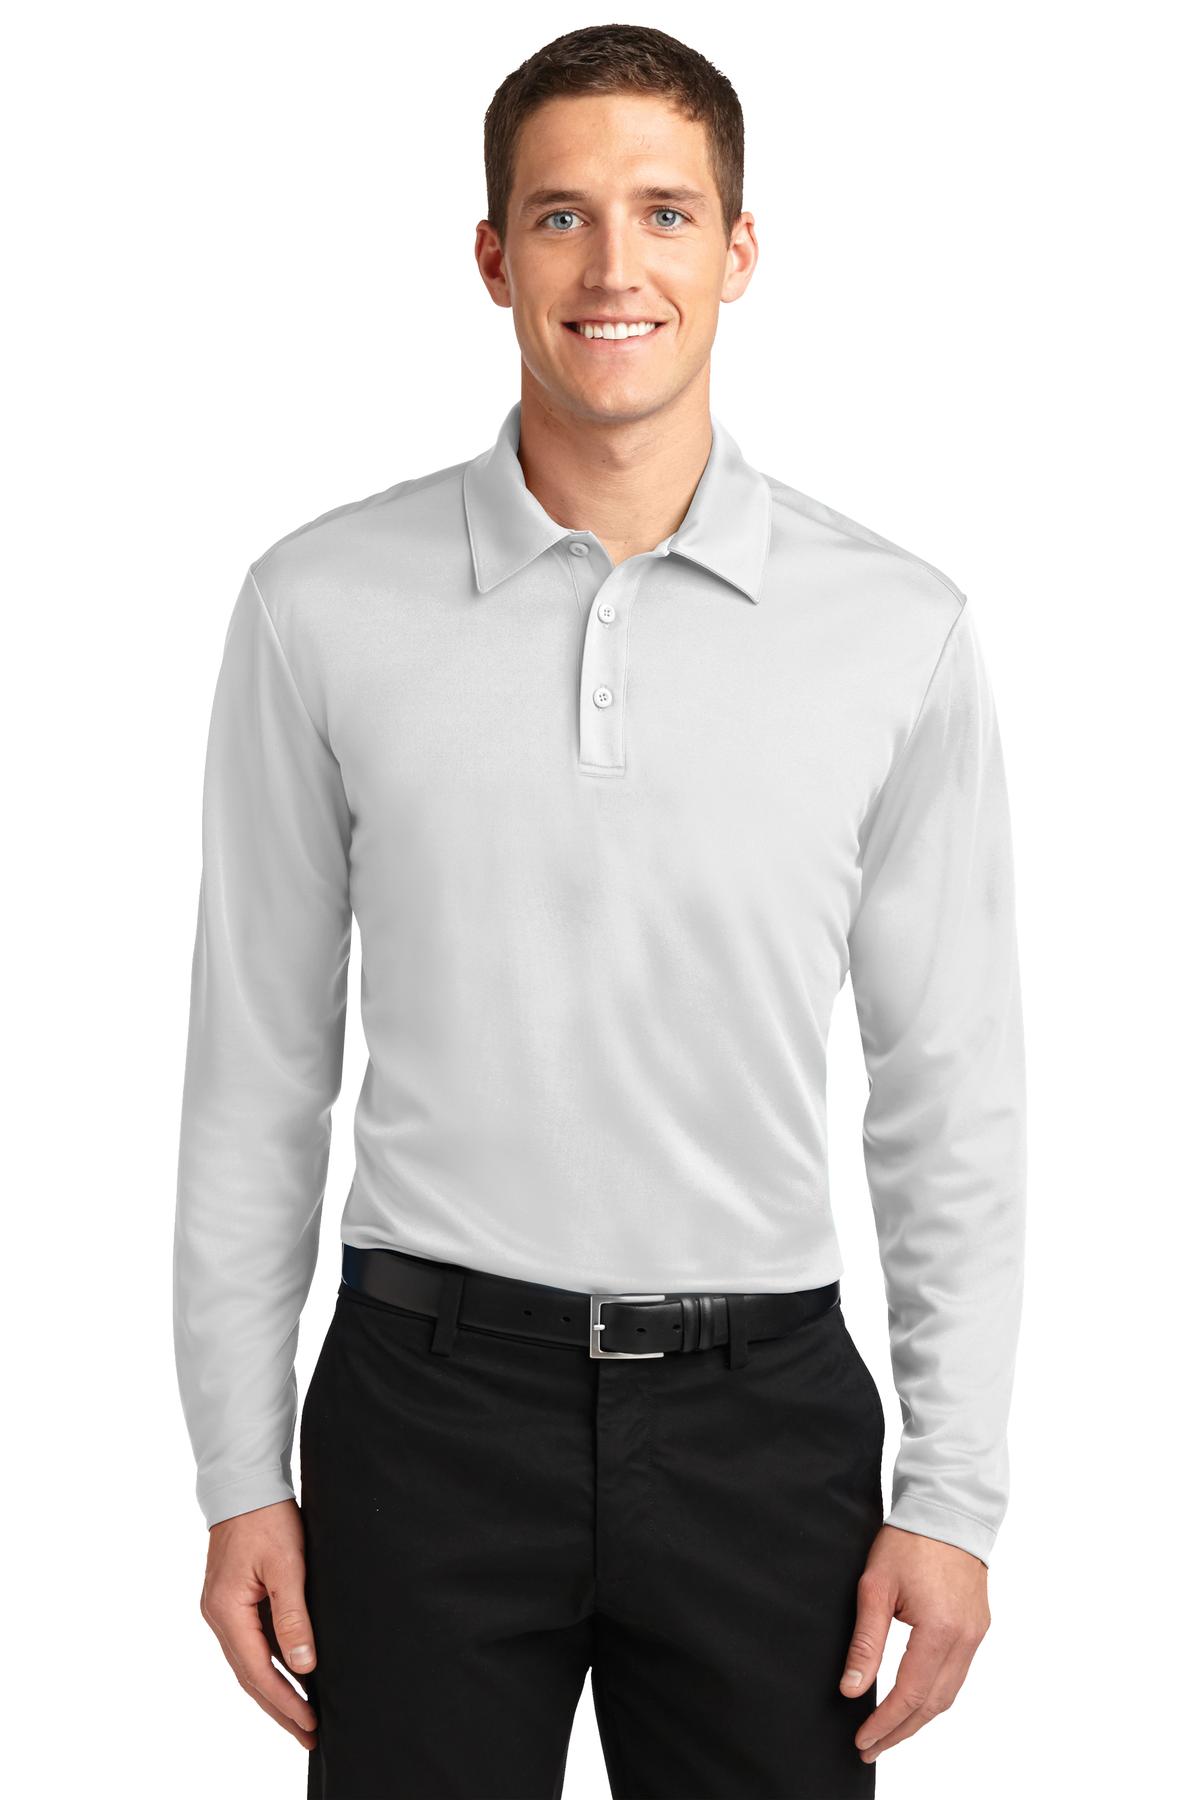 Port Authority Silk Touch Performance Long Sleeve Polo. K540LS